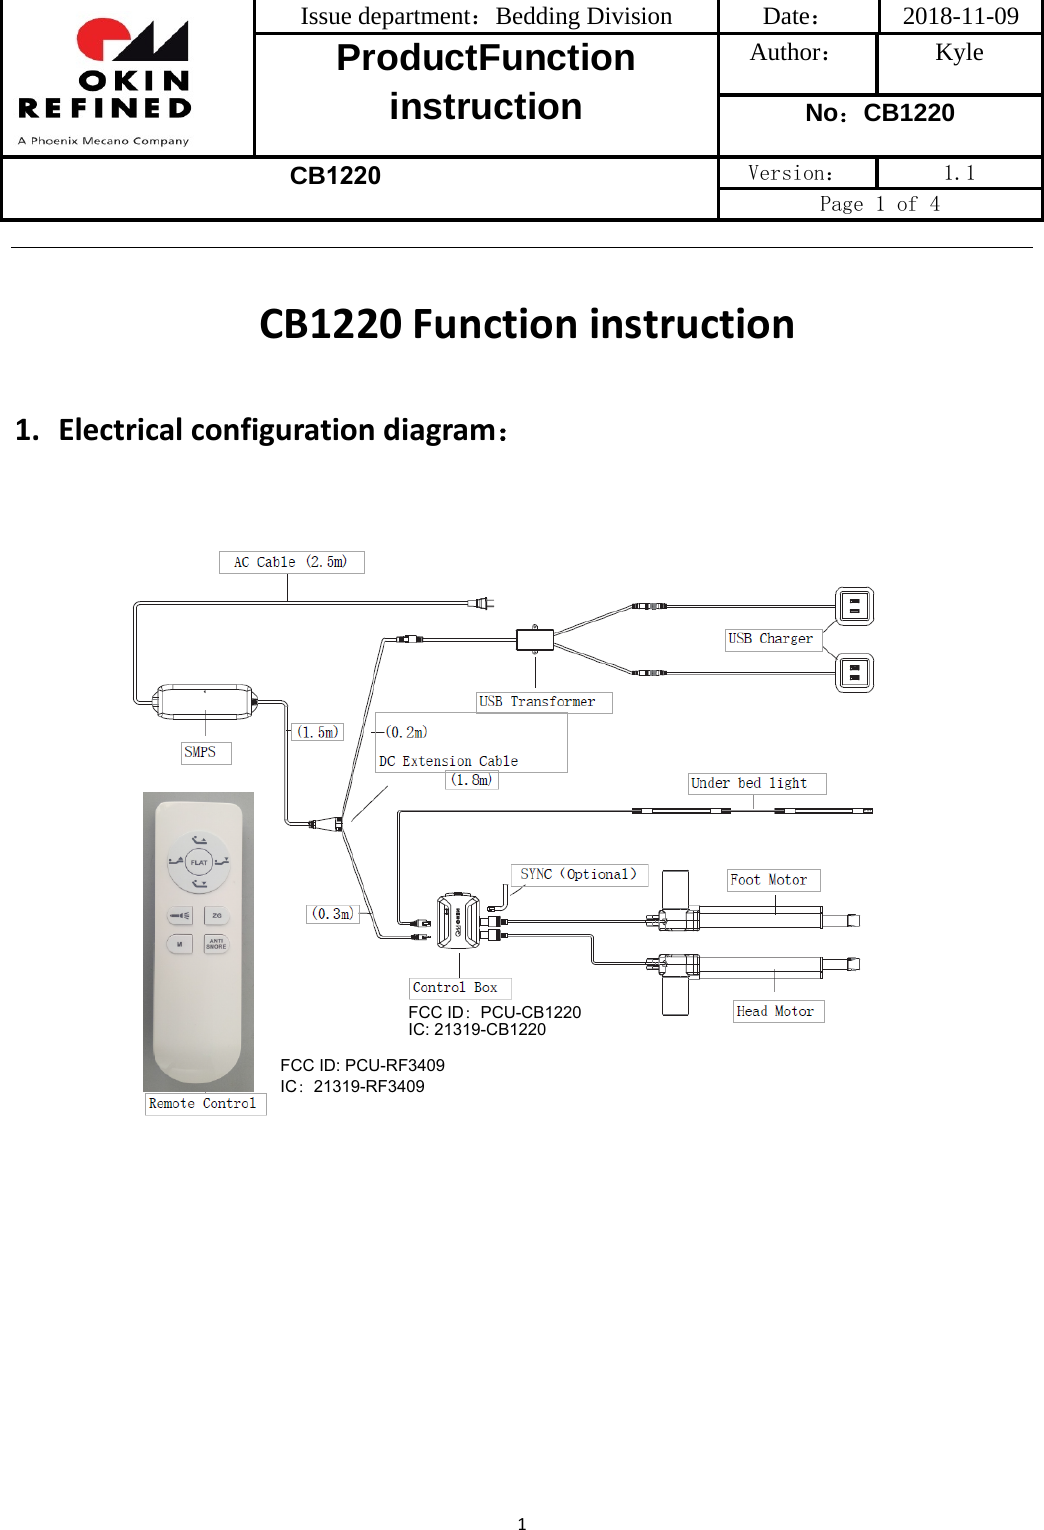 Issue department：Bedding Division  Date： 2018-11-09 ProductFunction instruction Author： Kyle No：CB1220 CB1220 Version：  1.1 Page 1 of 4 1CB1220 Functioninstruction1. Electricalconfigurationdiagram：FCC ID: PCU-RF3409 IC：21319-RF3409FCC ID：PCU-CB1220 IC: 21319-CB1220